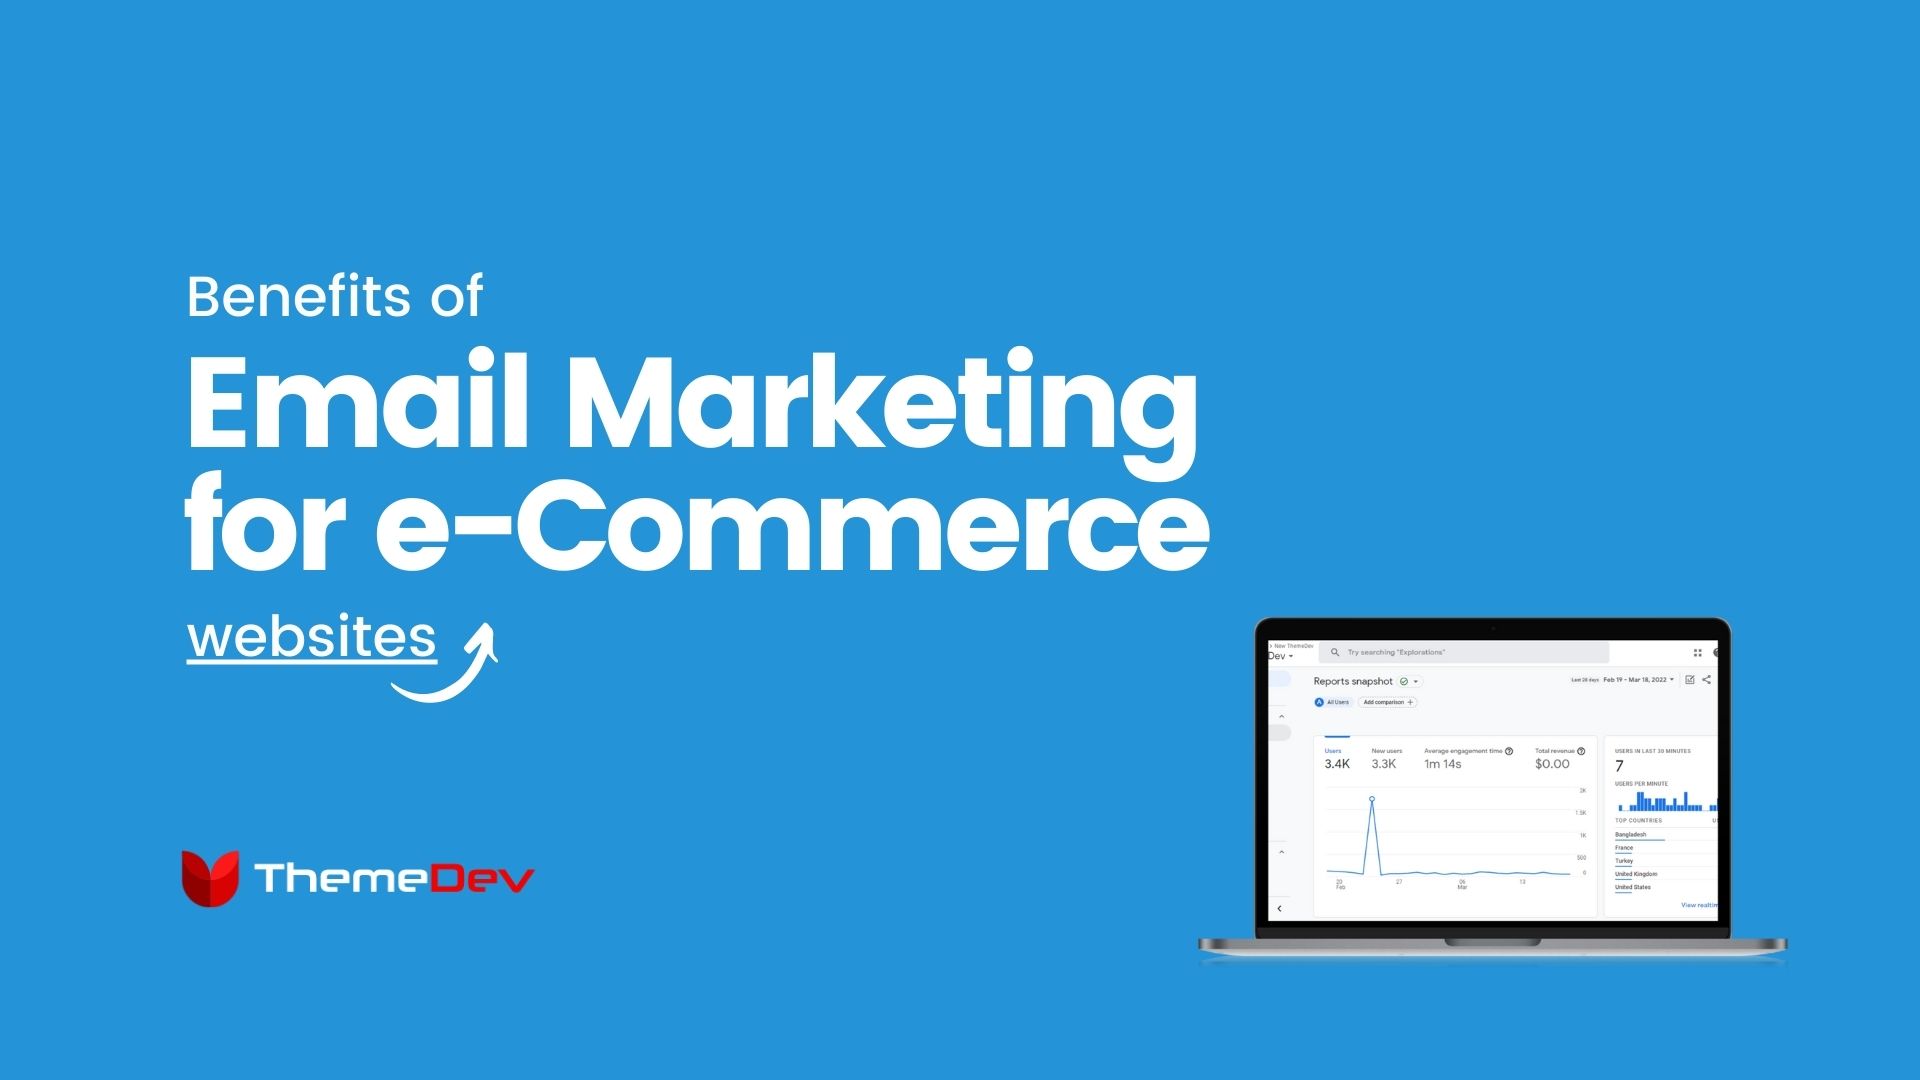 Benefits of Email Marketing for e-commerce websites